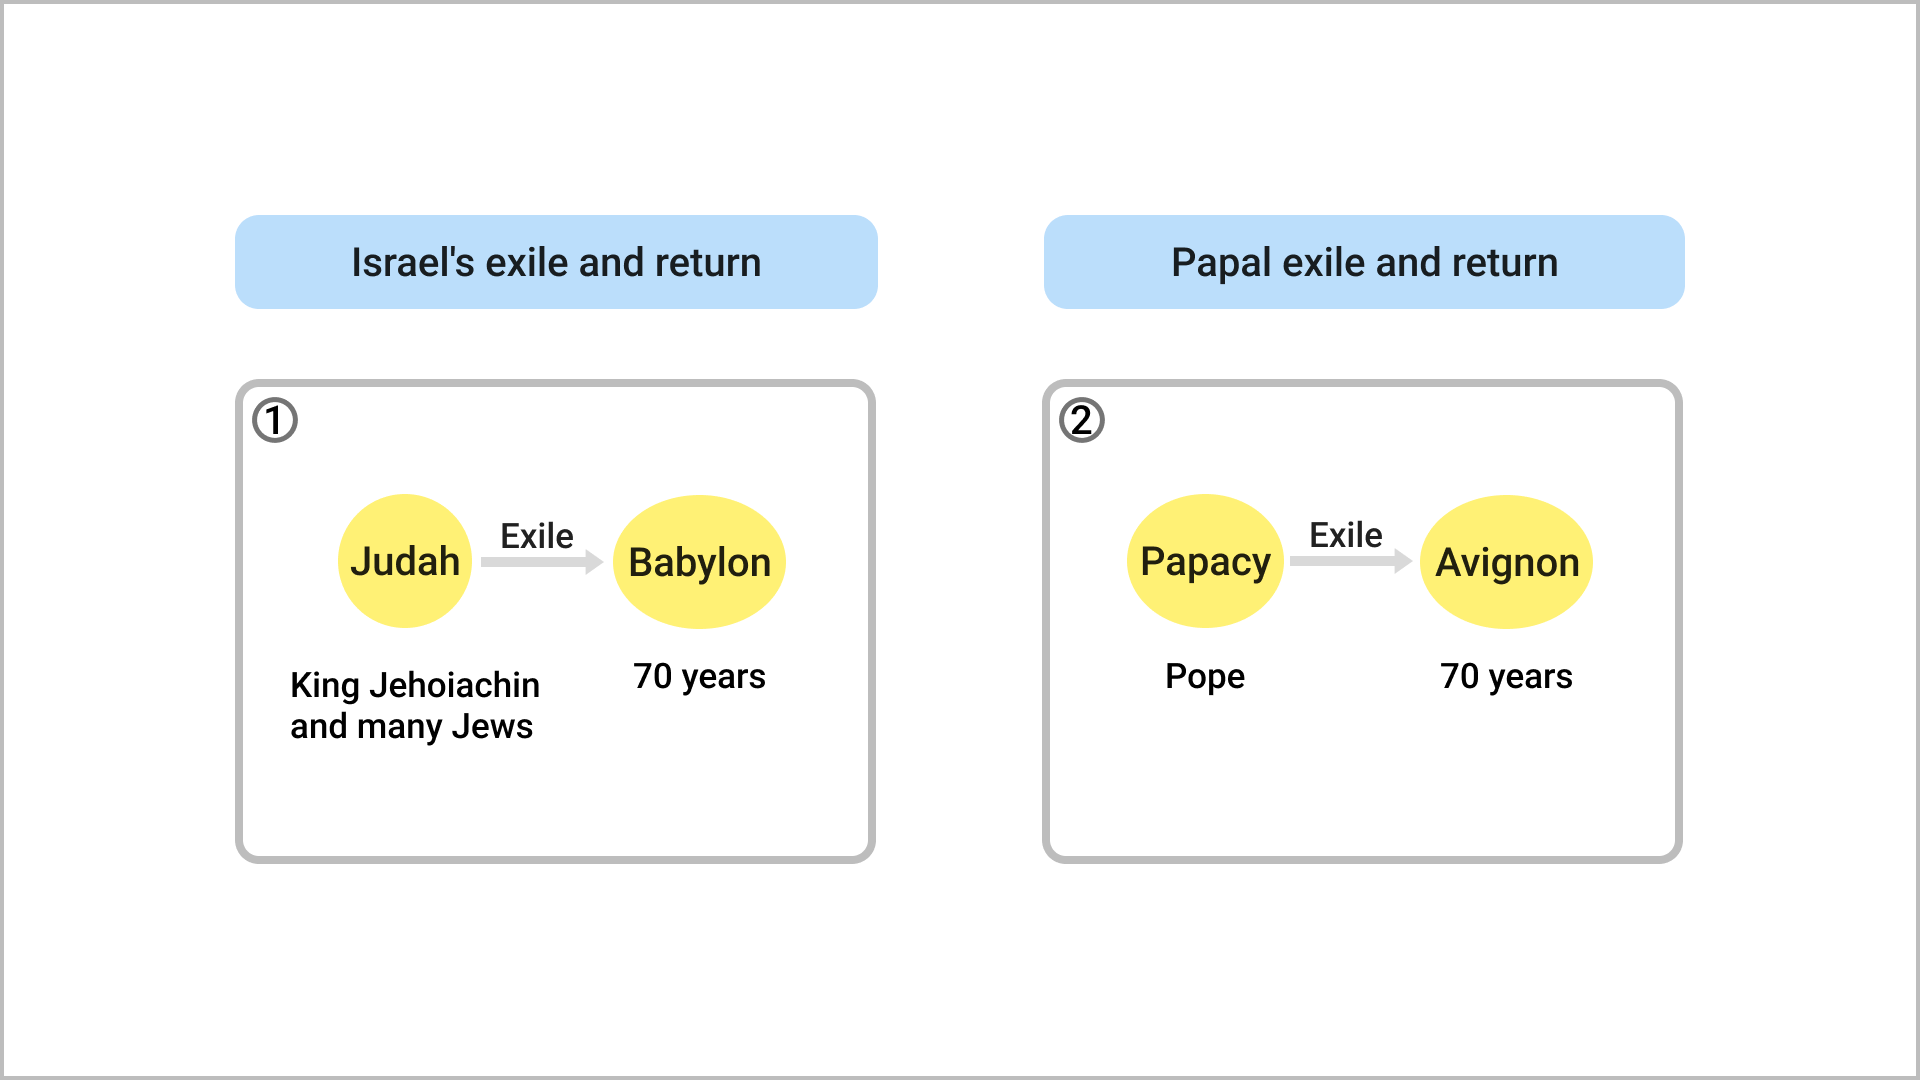 The Period of Israel's Exile and Return and the Period of the Papal Exile and Return